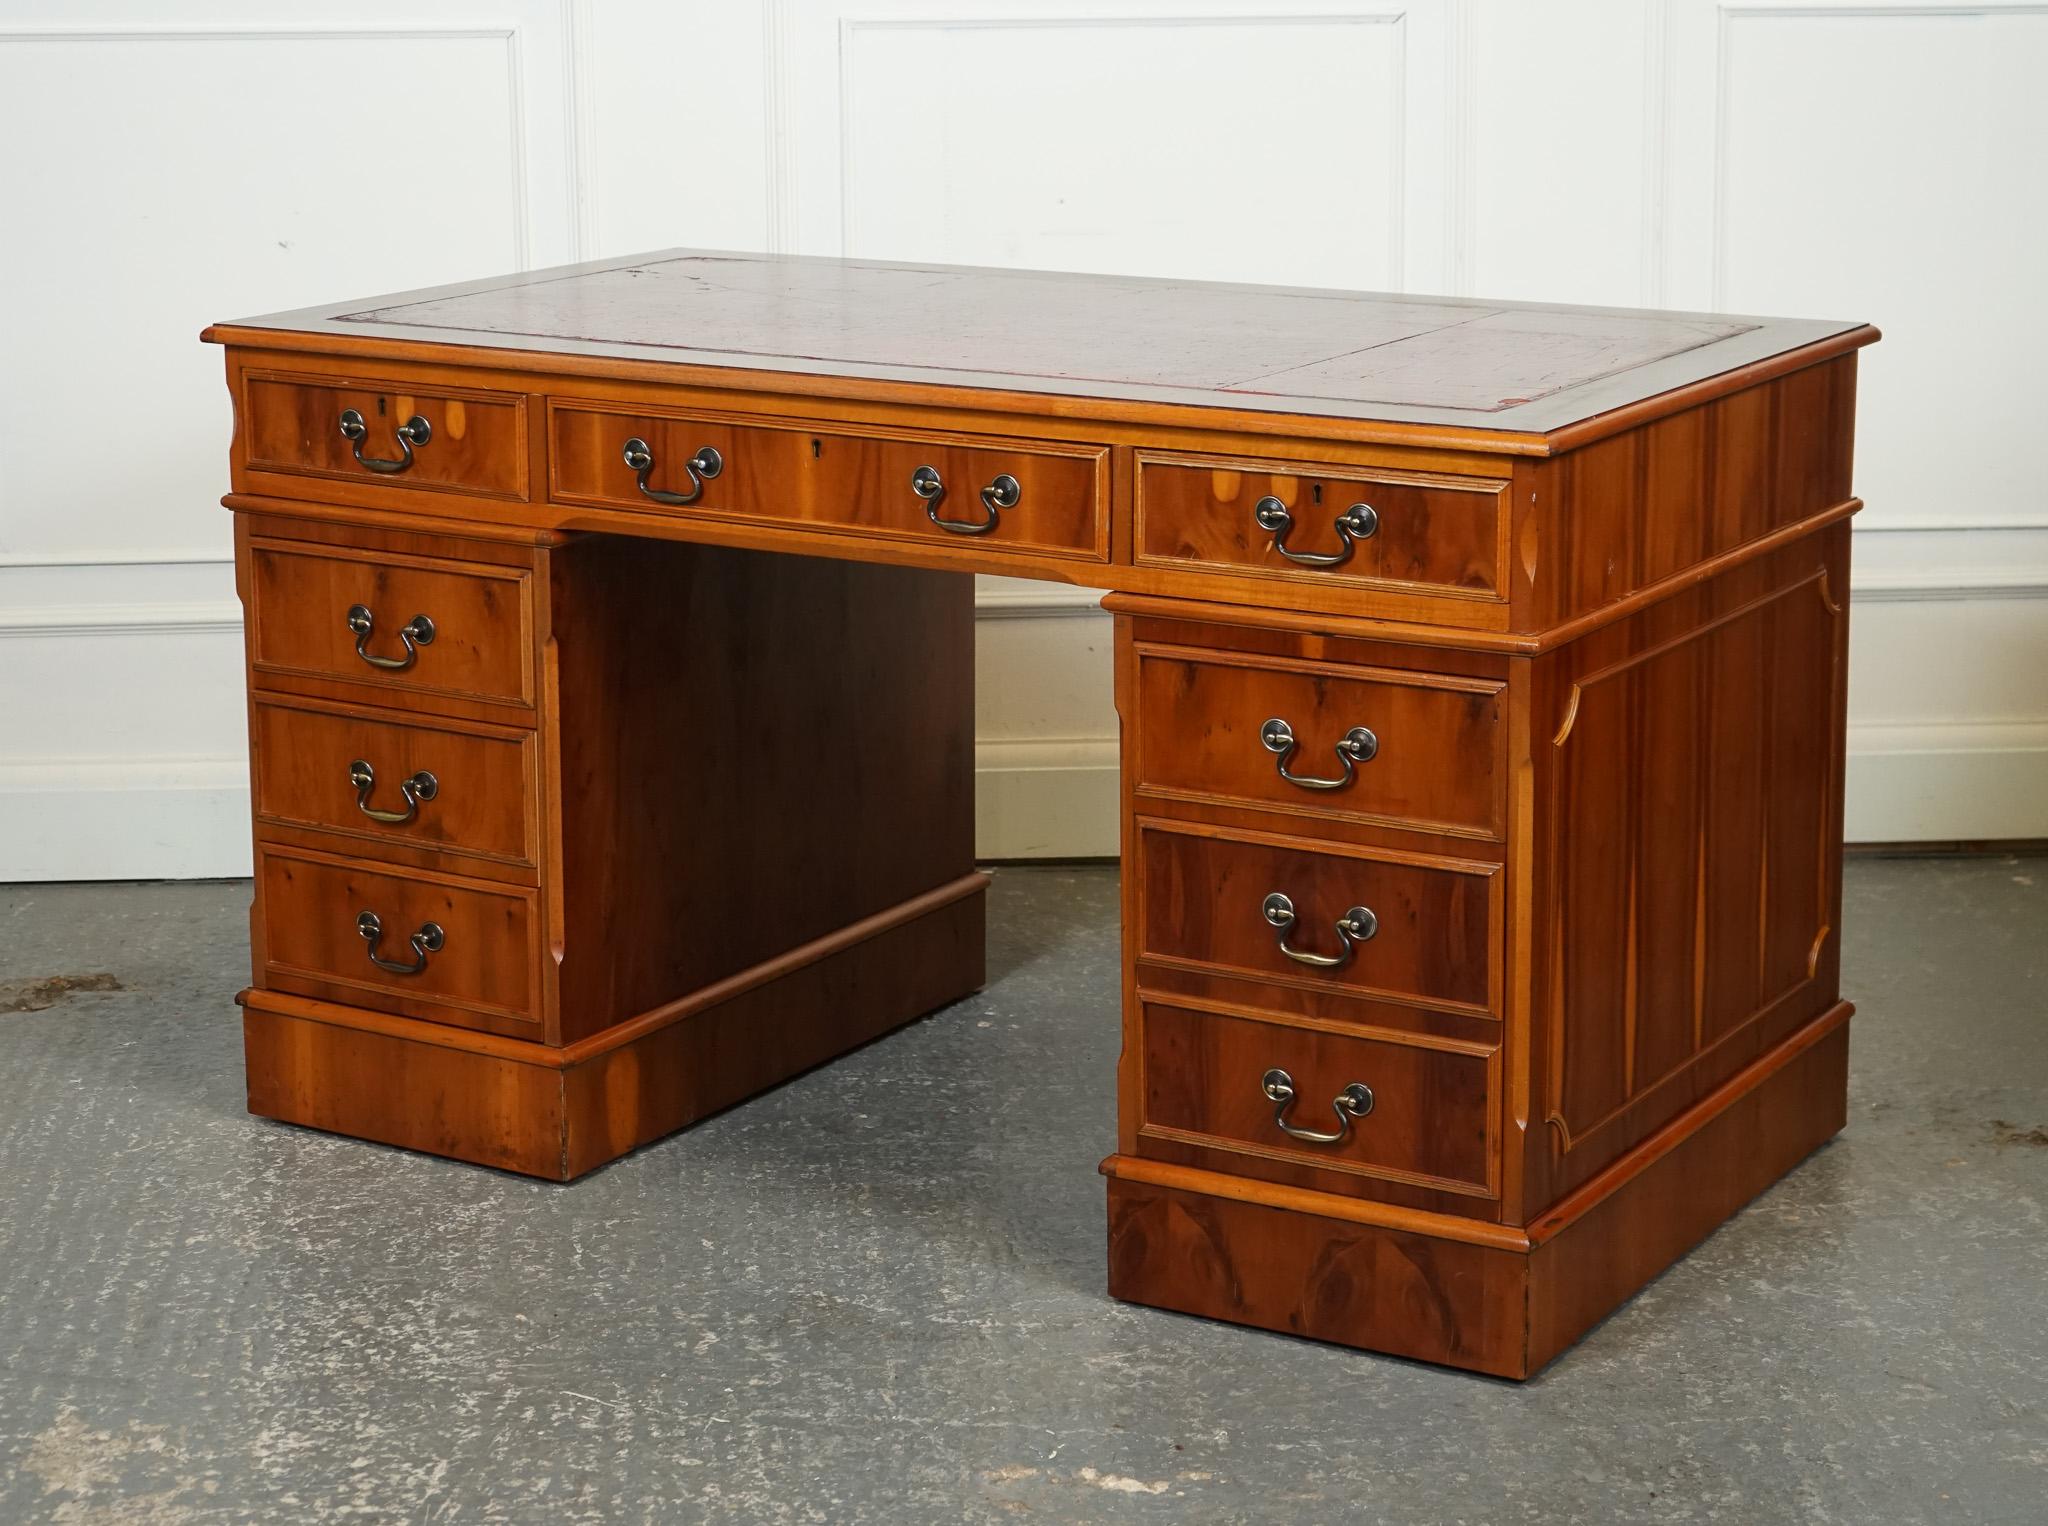 British VINTAGE YEW TWIN PEDESTAL DESK WiTH BURGUNDY LEATHER TOP J1 For Sale